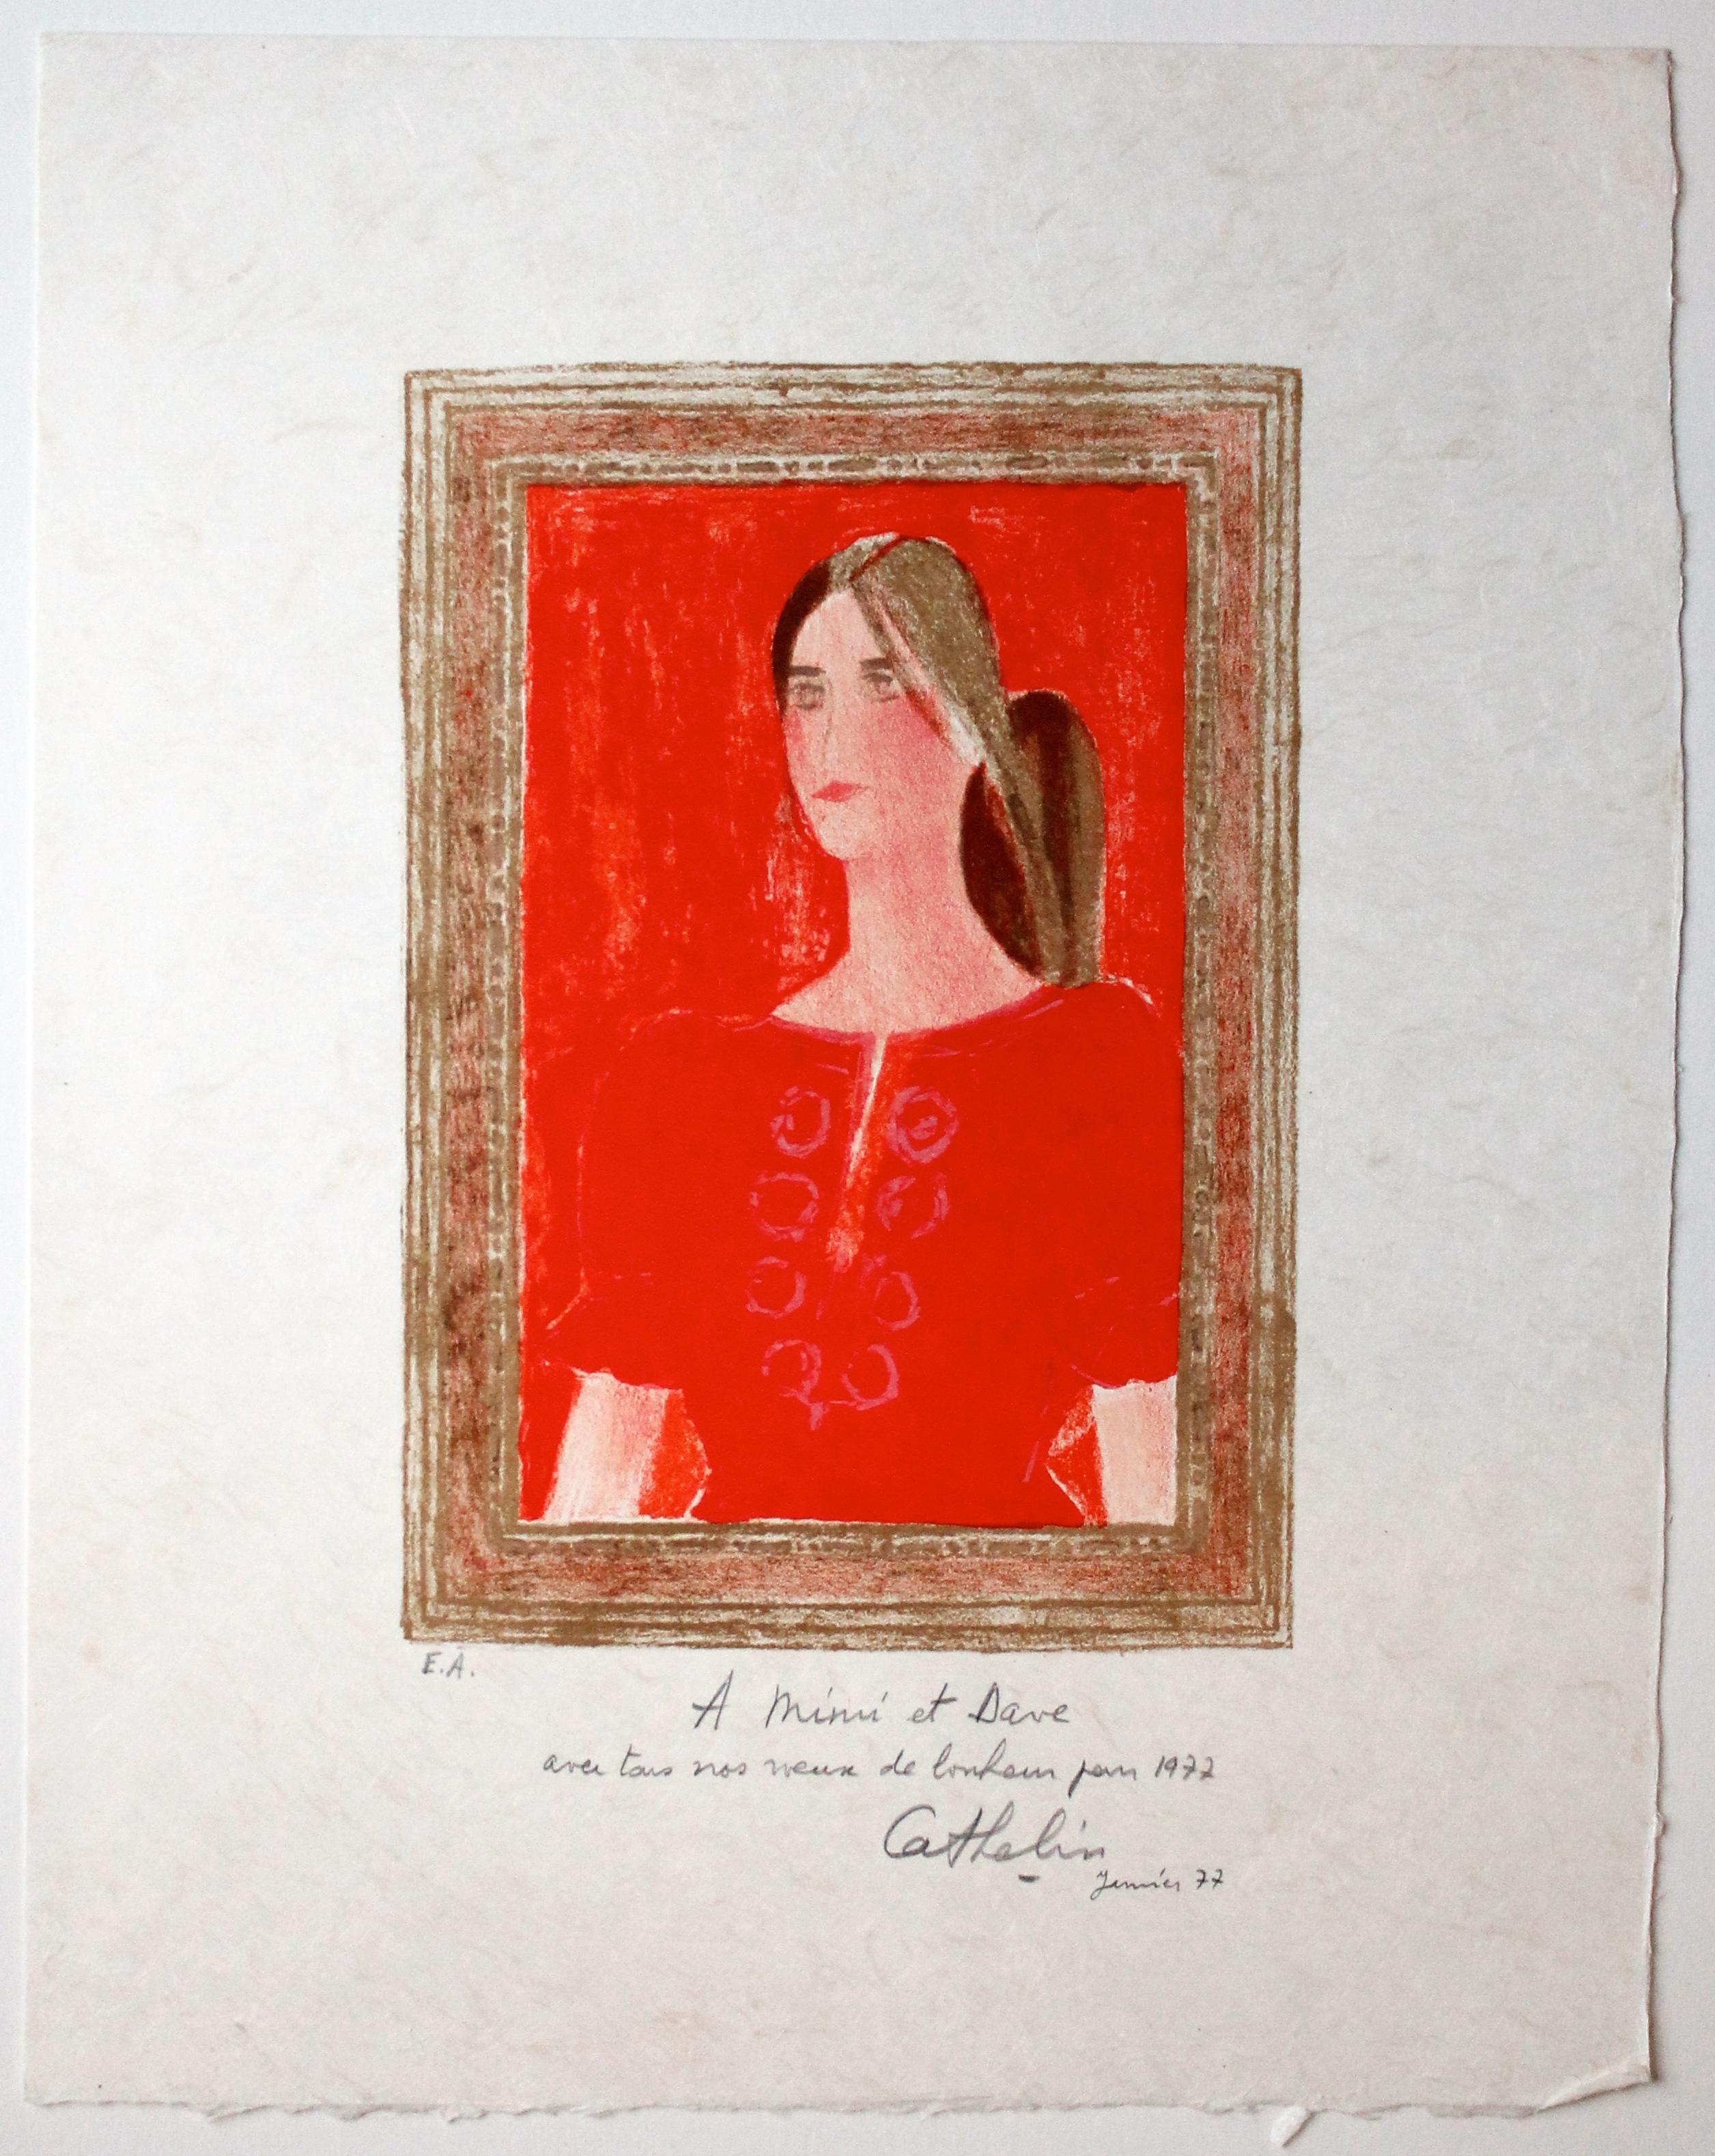 Beautiful decorative original print by the famous French Painter Bernard Cathelin(1919-2004). Printed in 1976 in an edition of 150, our print is an artist's proof (E.A.) especially annotated to the artitst's American dealer David Fimlay. Paper size: